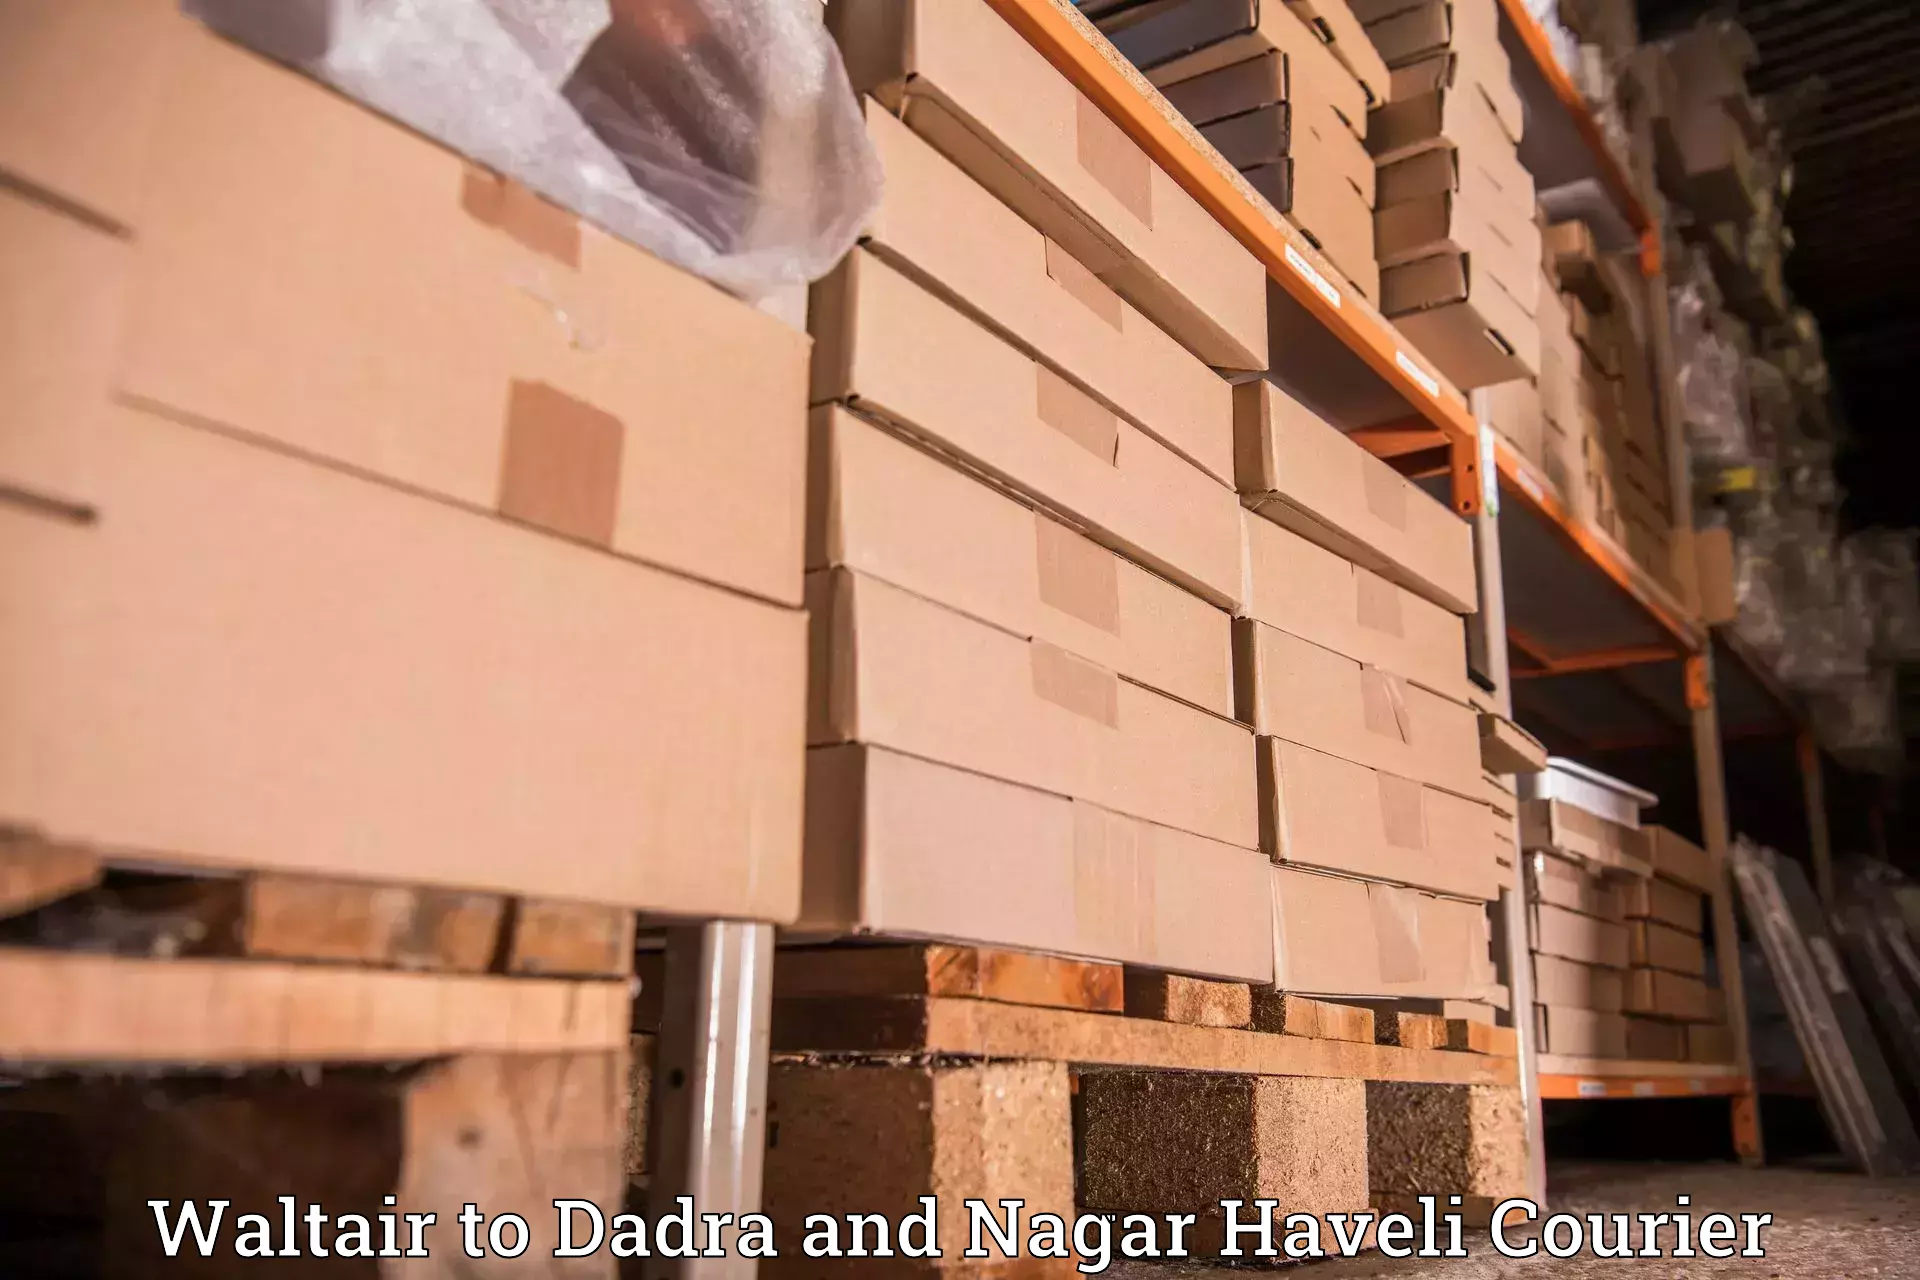 Parcel service for businesses Waltair to Dadra and Nagar Haveli